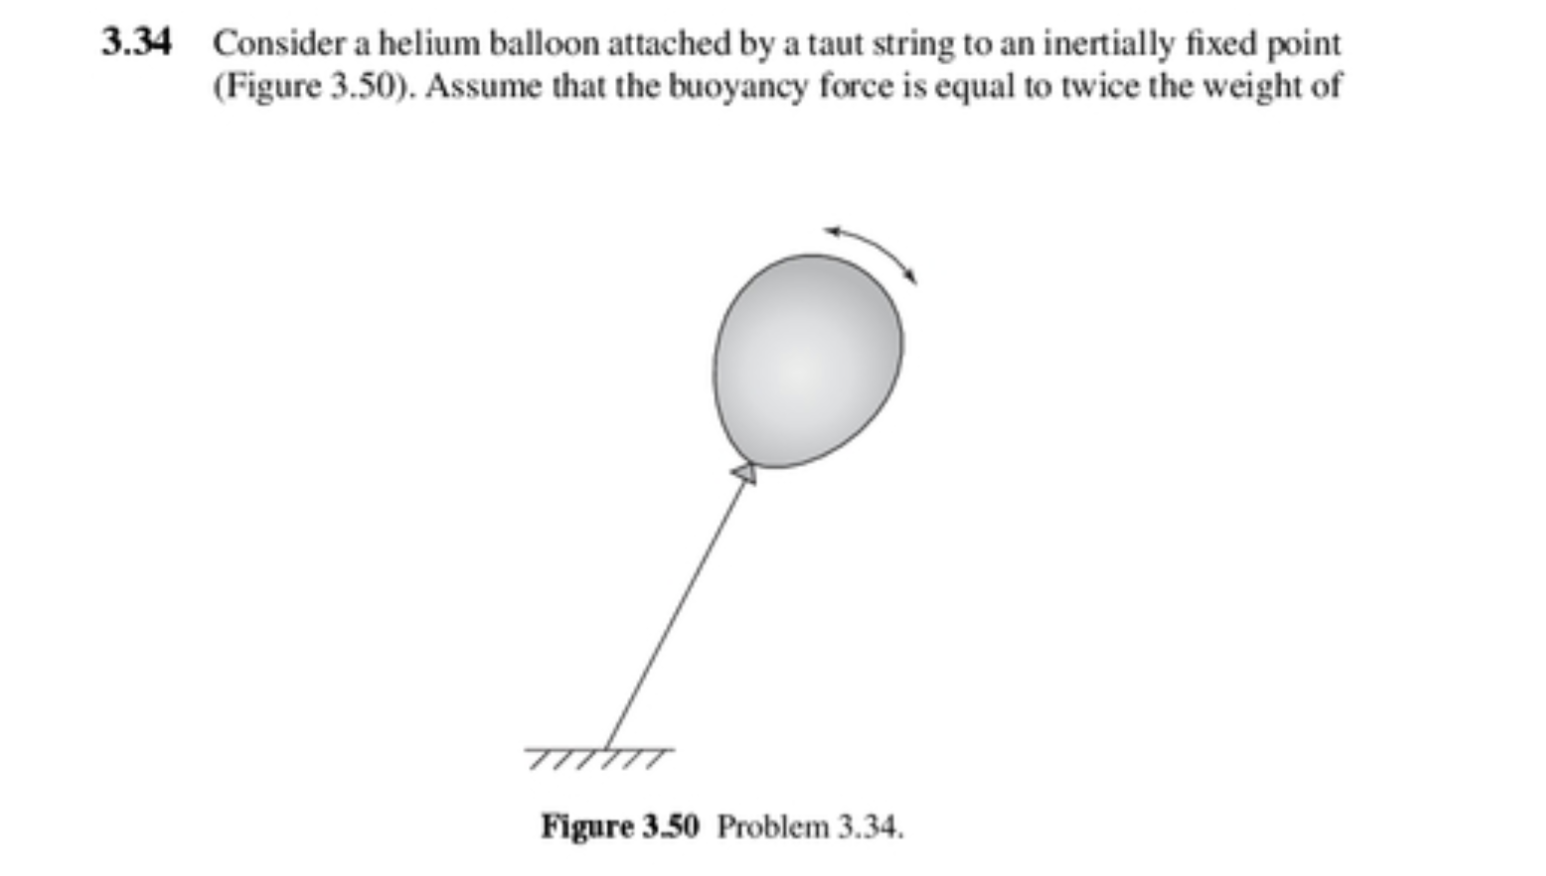 3.34 Consider a helium balloon attached by a taut string to an inertially fixed point
(Figure 3.50). Assume that the buoyancy force is equal to twice the weight of
Figure 3.50 Problem 3.34.
